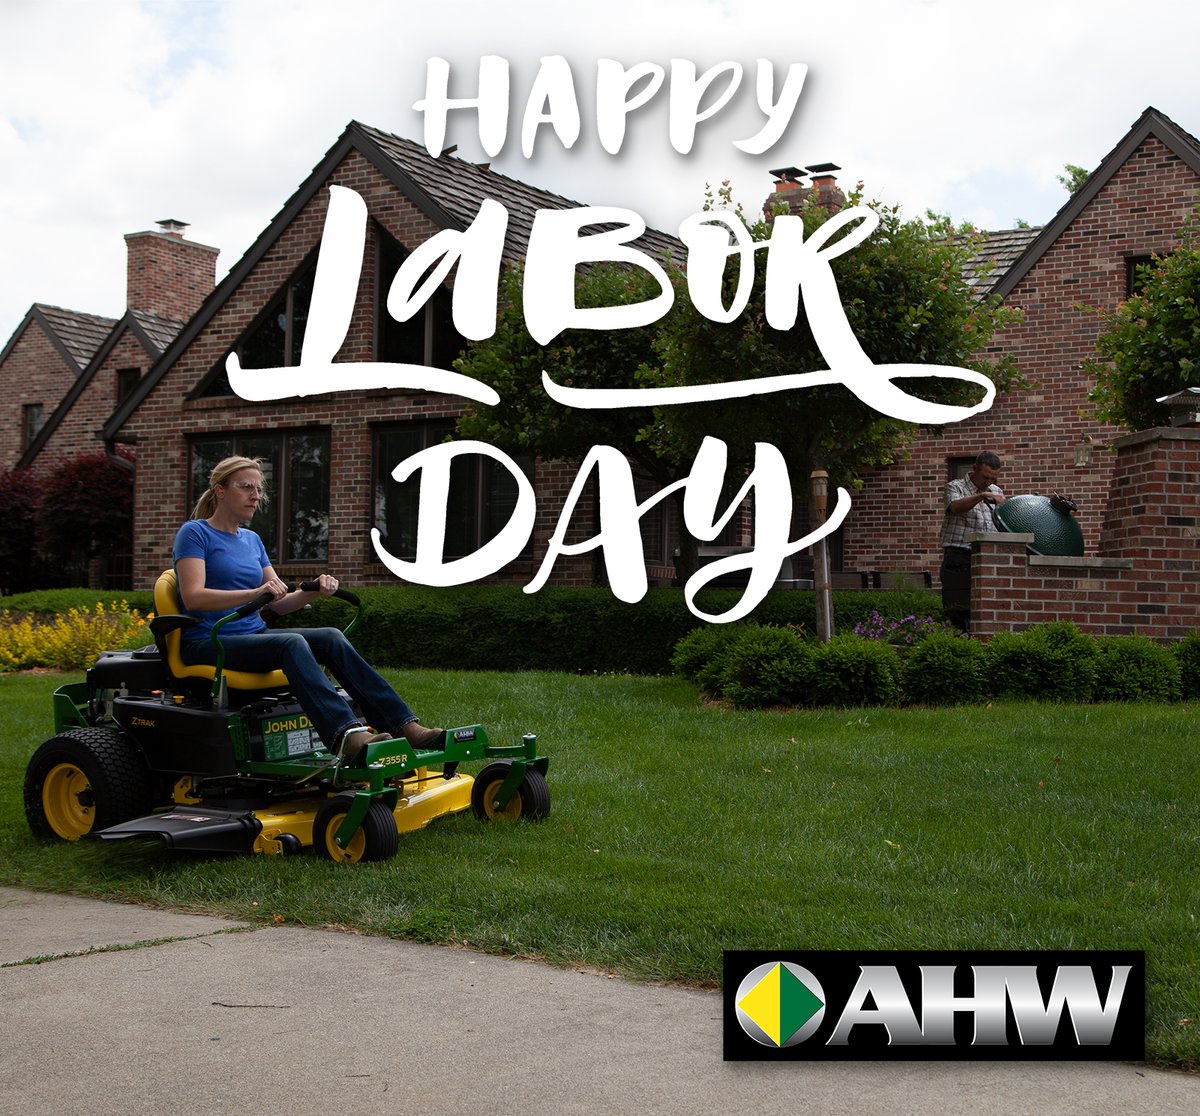 All of us here in the AHW family hope you enjoy a fun and relaxing Labor Day! 

#AHWLLC #AlwaysHereWhen #LaborDay #BackyardBarbecue